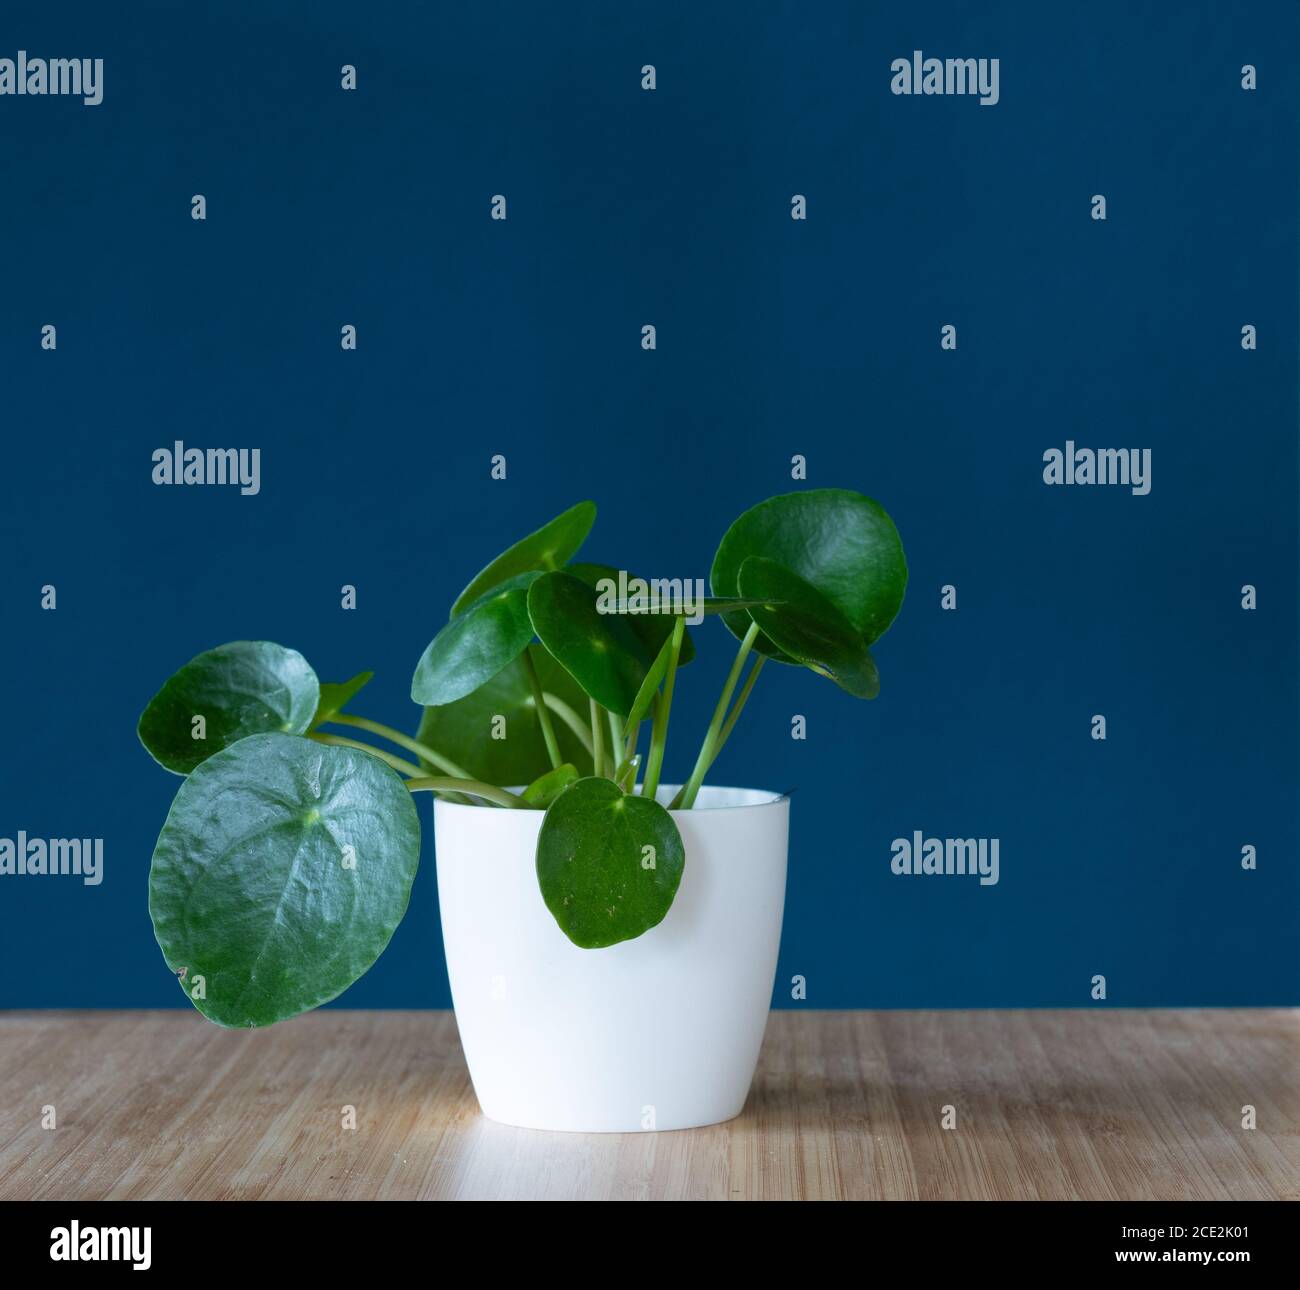 Pilea Peperomioides, Chinese money plant,  or pancake young pot plant in white pot against blue teal background Stock Photo